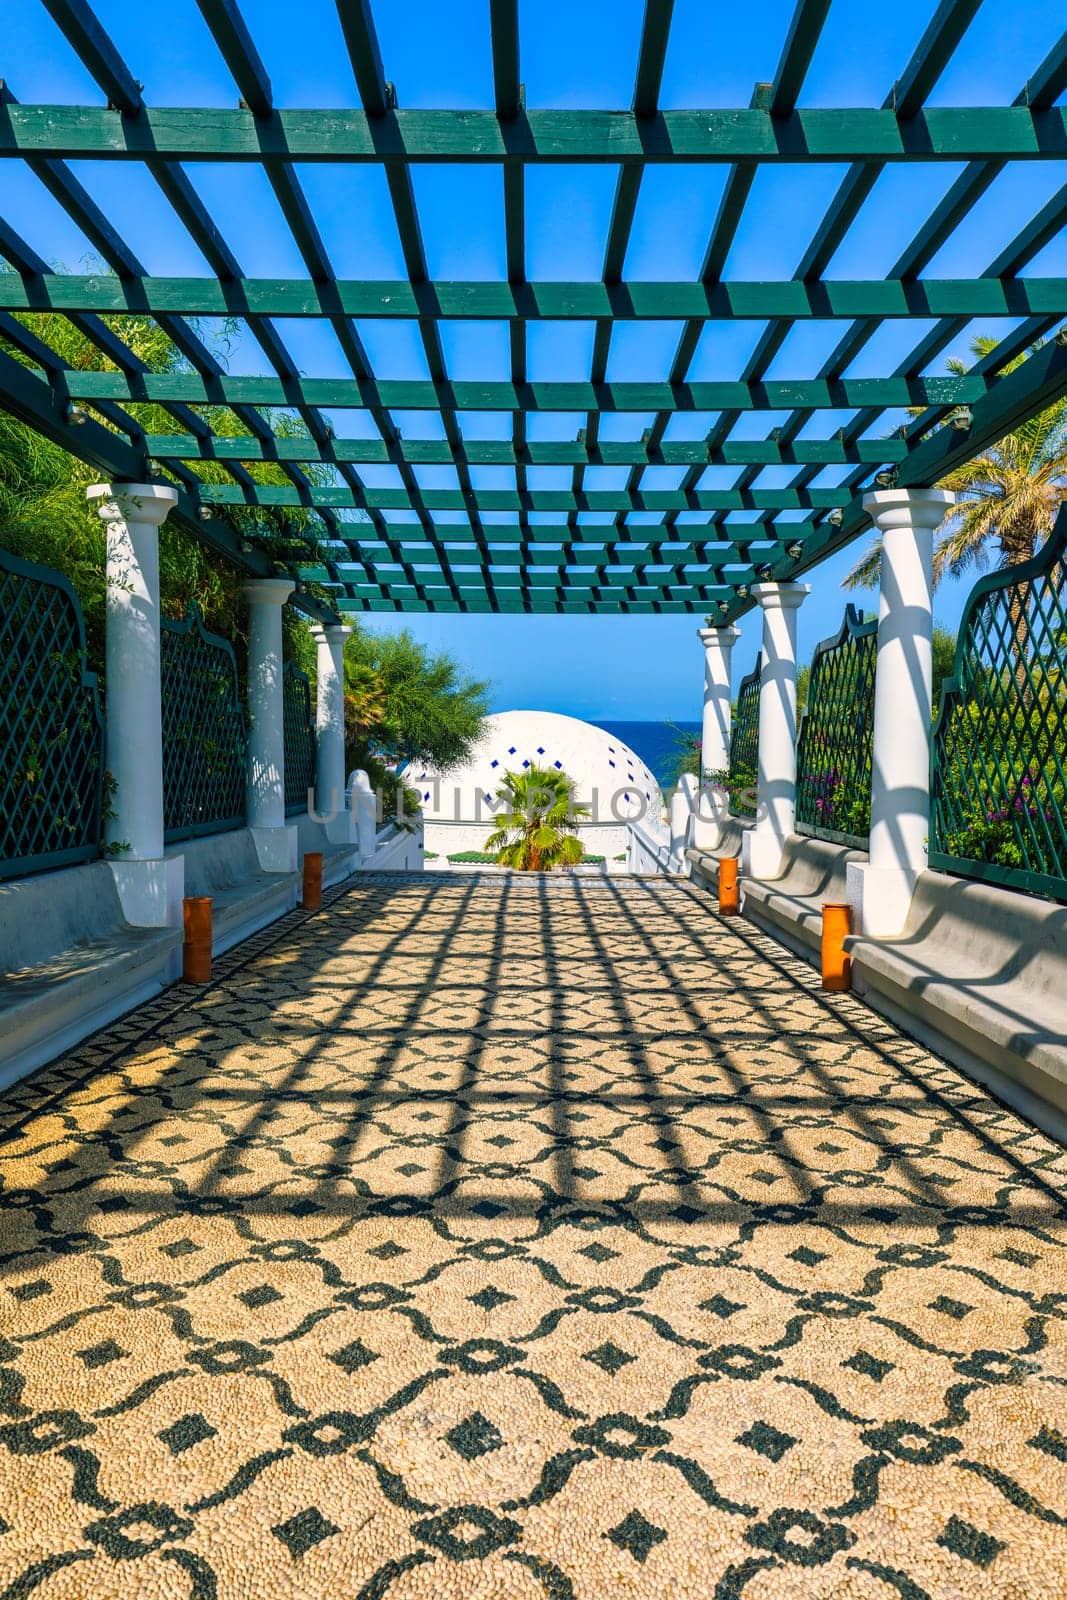 The beautiful buildings at Kalithea Springs constructed in the 1930s, Rhodes Island, Greece, Europe. Kallithea Therms, Kallithea Springs located at the bay of Kallithea on Rhodes island, Greece. 